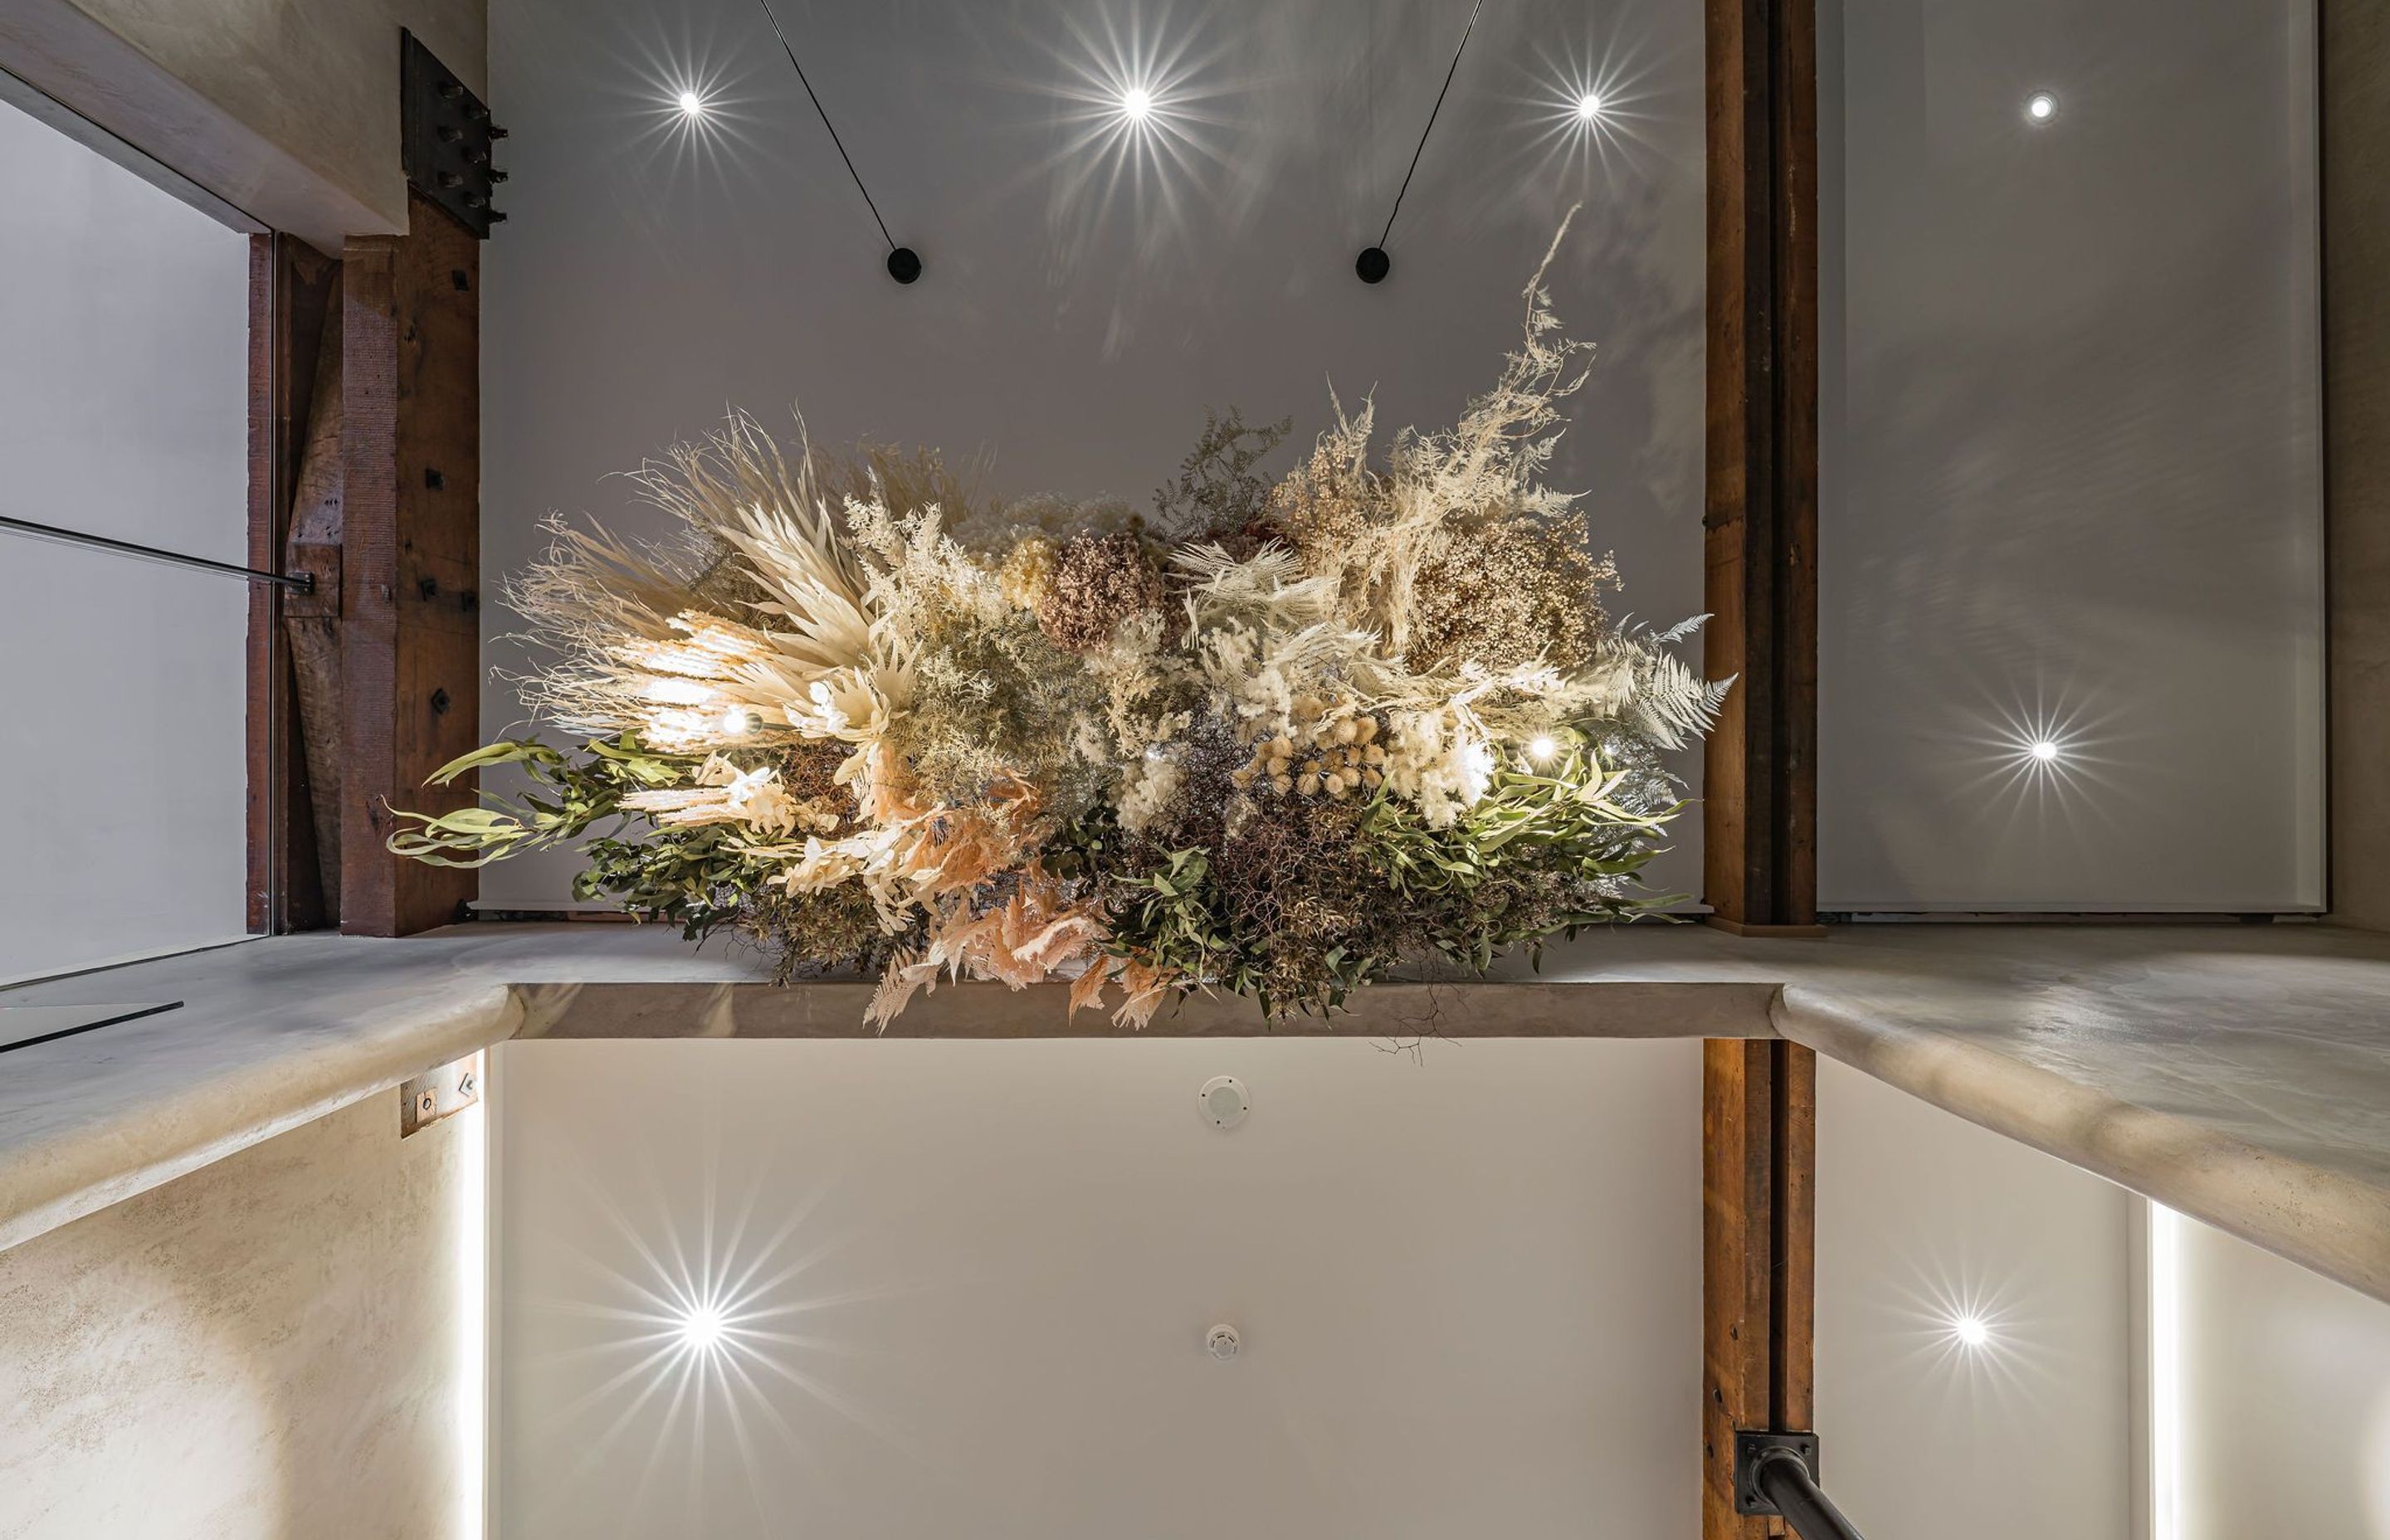 nu Yoga Studio Dunedin. Looking up at the Receptions preserved floral installation.